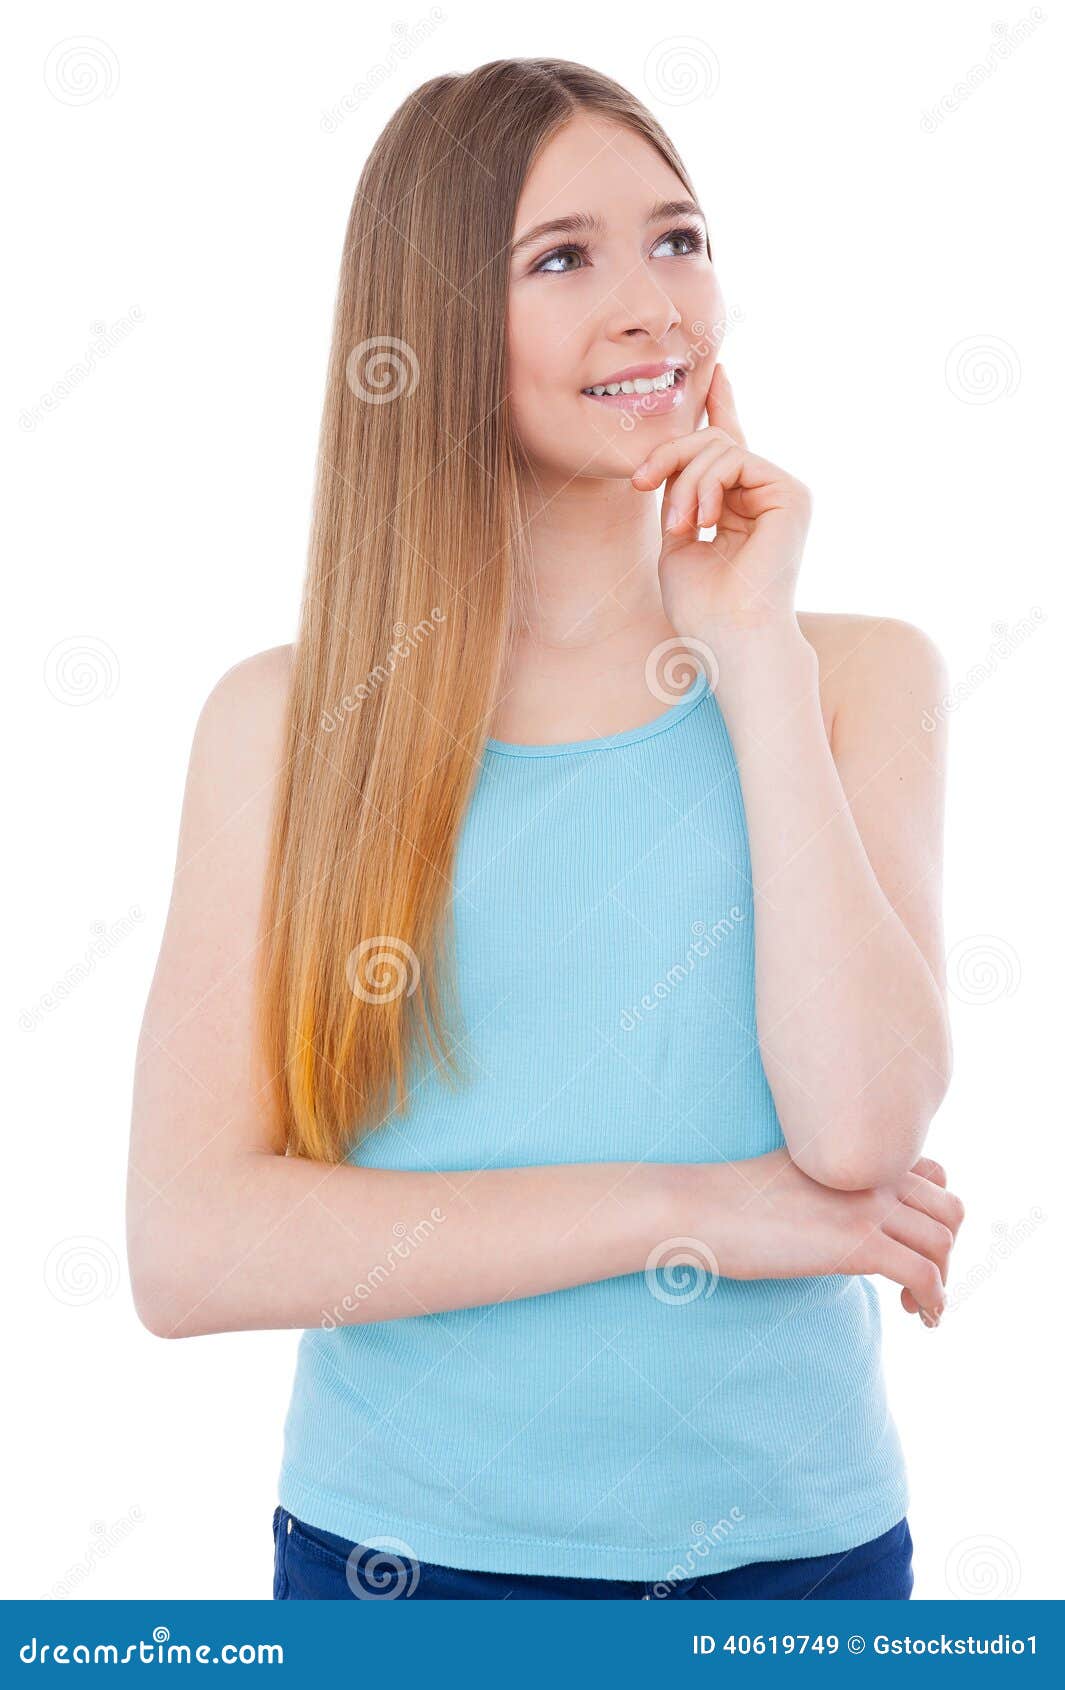 Lost in thoughts. stock image. Image of cheerful, brown - 40619749